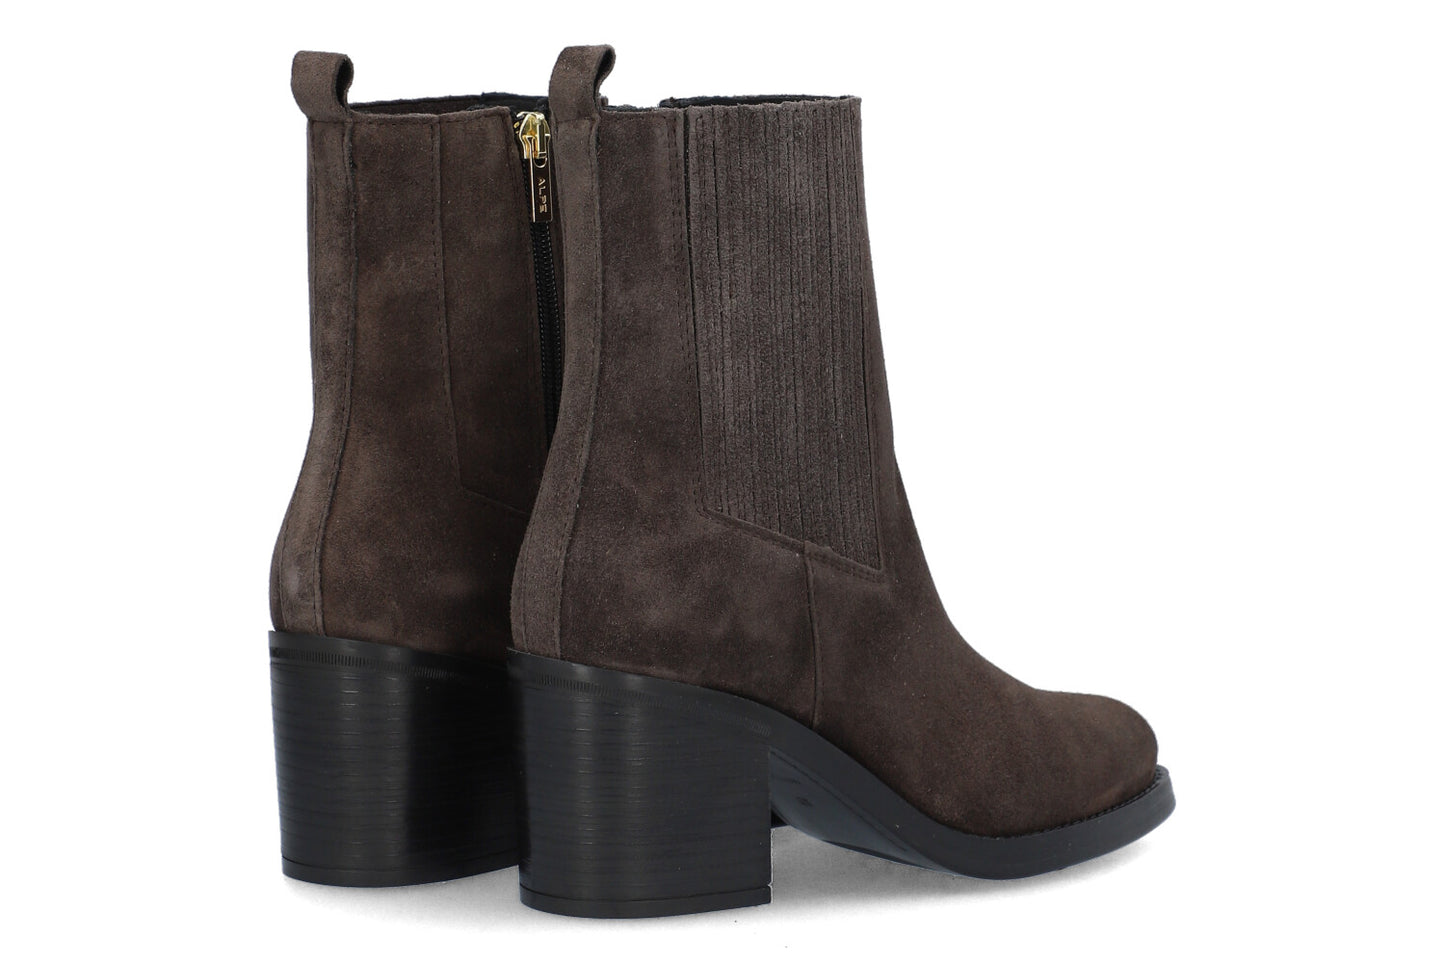 Alpe 2403 11 34 Brown Ankle Boots